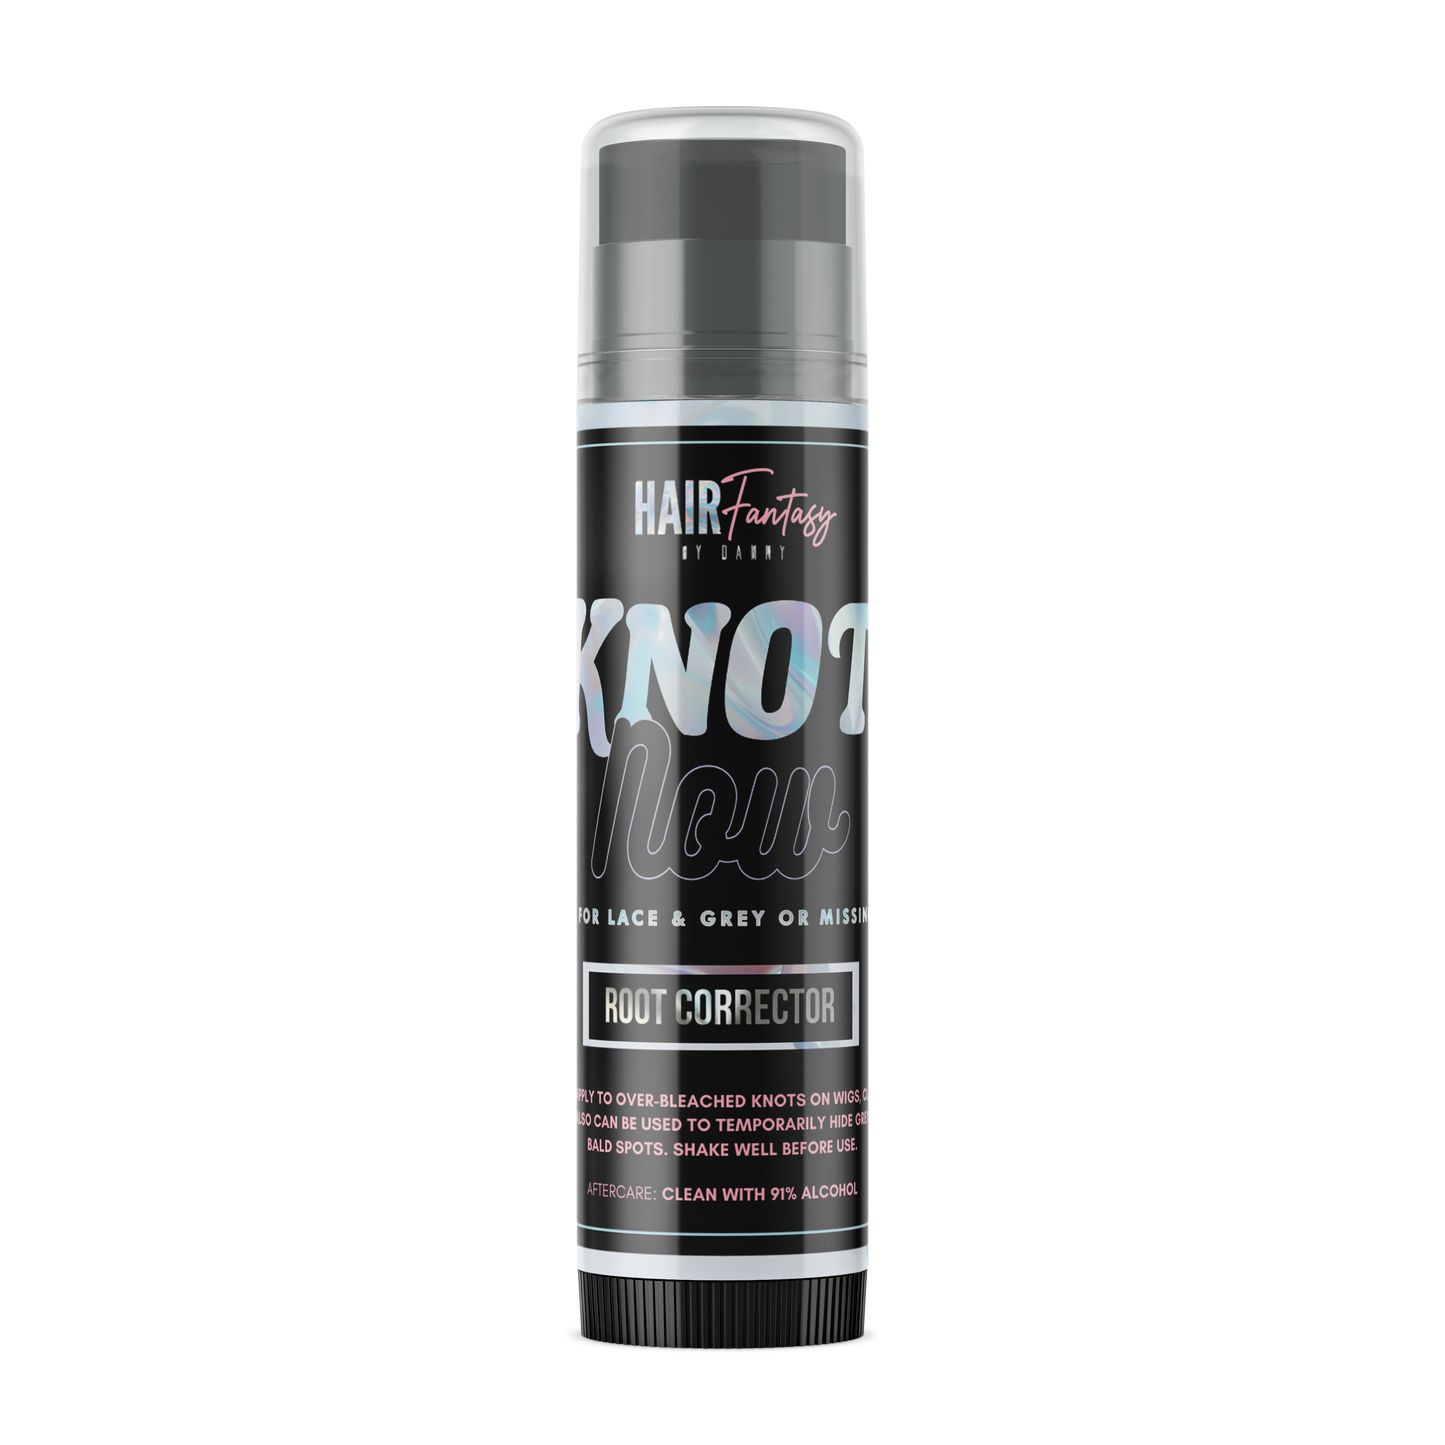 Knot now! ROOT CORRECTOR